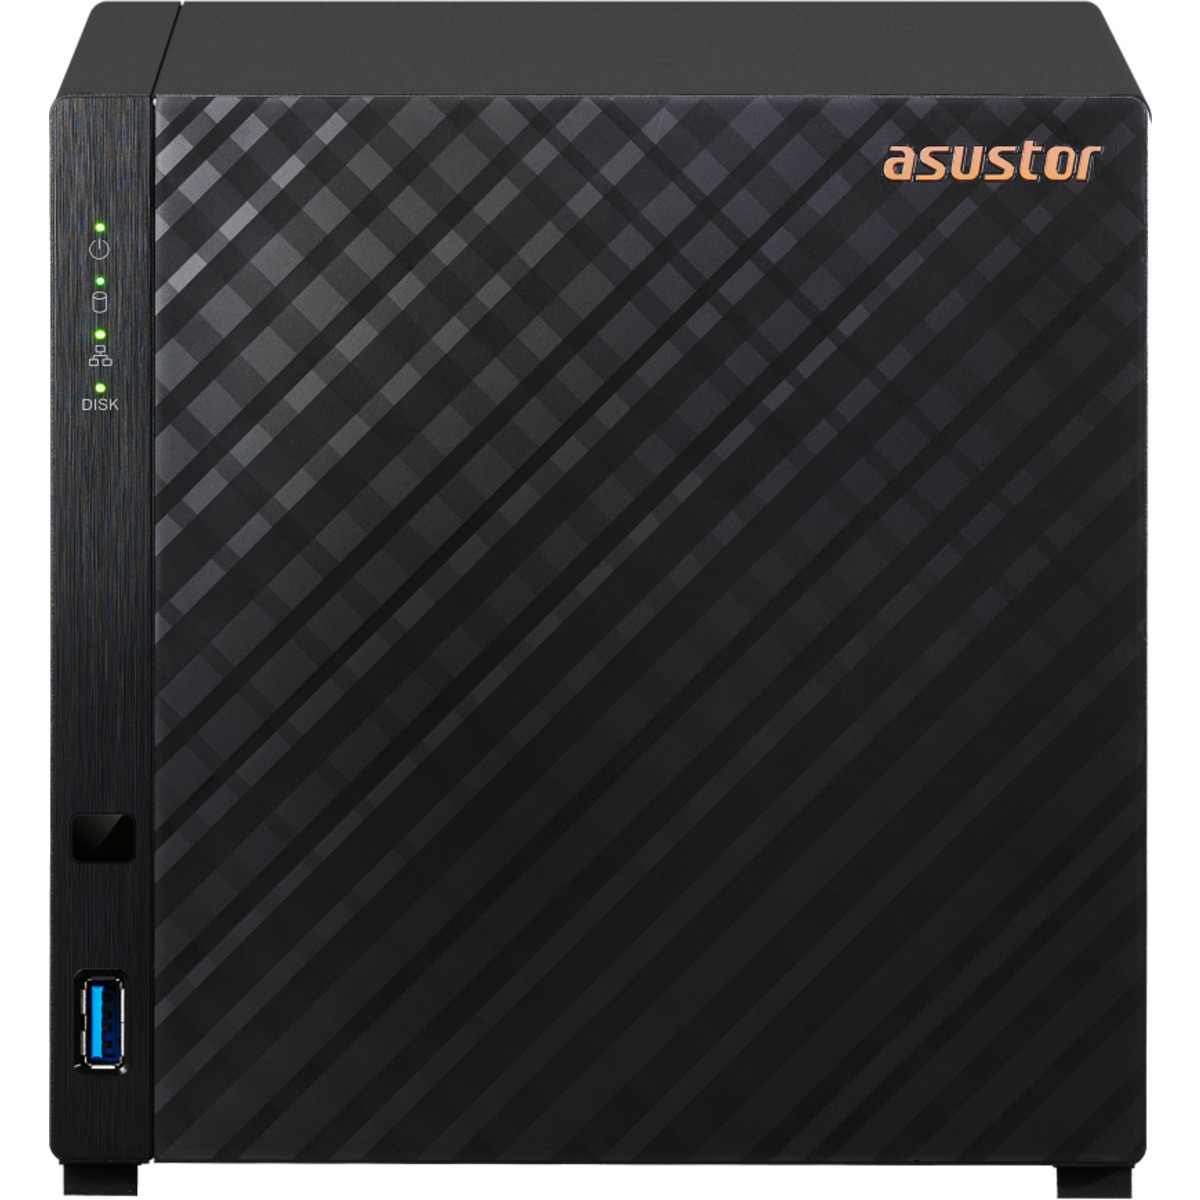 ASUSTOR AS1104T NAS - Network Attached Storage Device Burn-In Tested Configurations